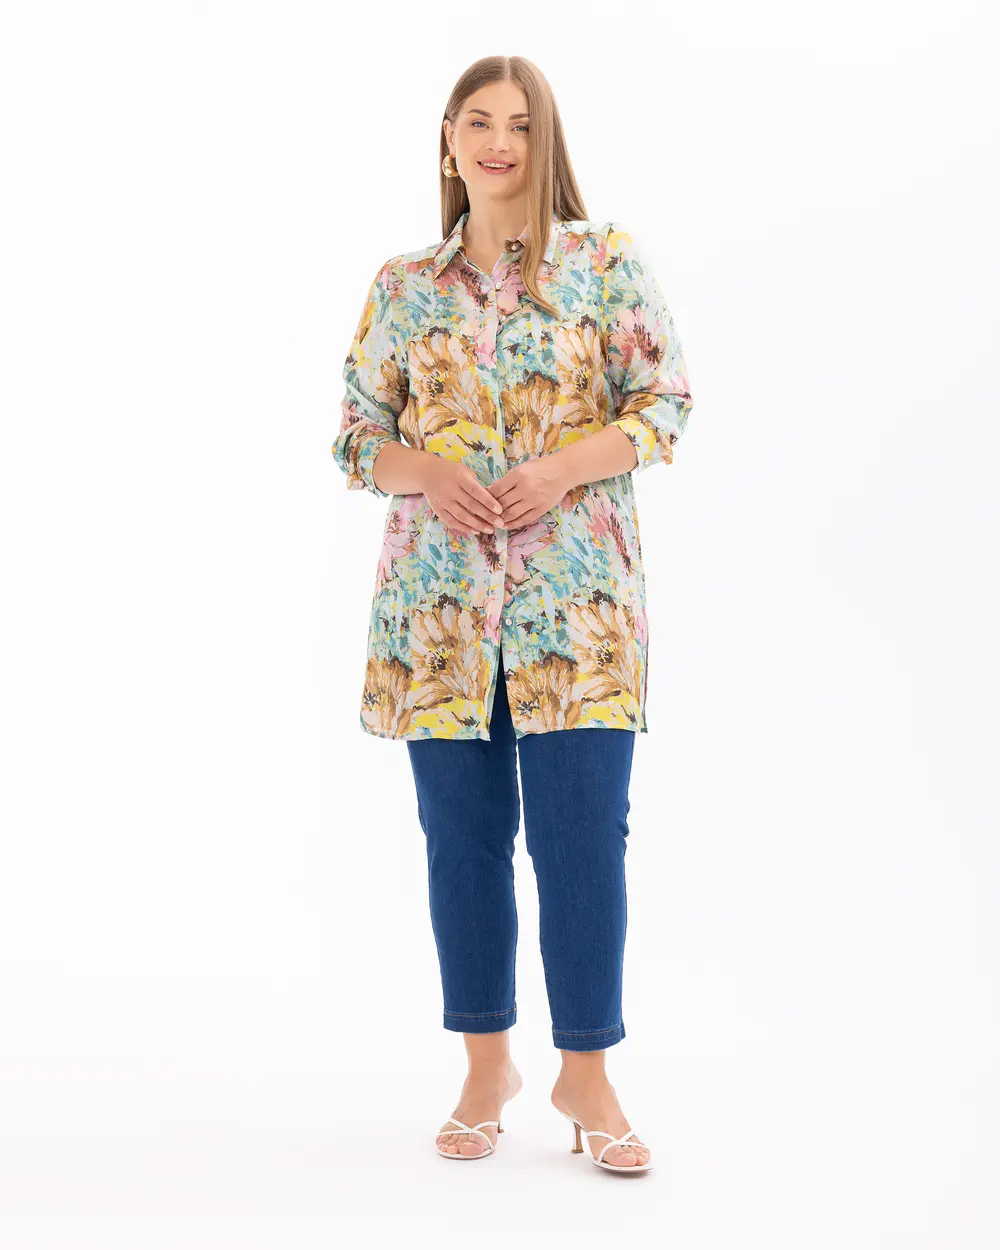 Plus Size Floral Patterned Tunic